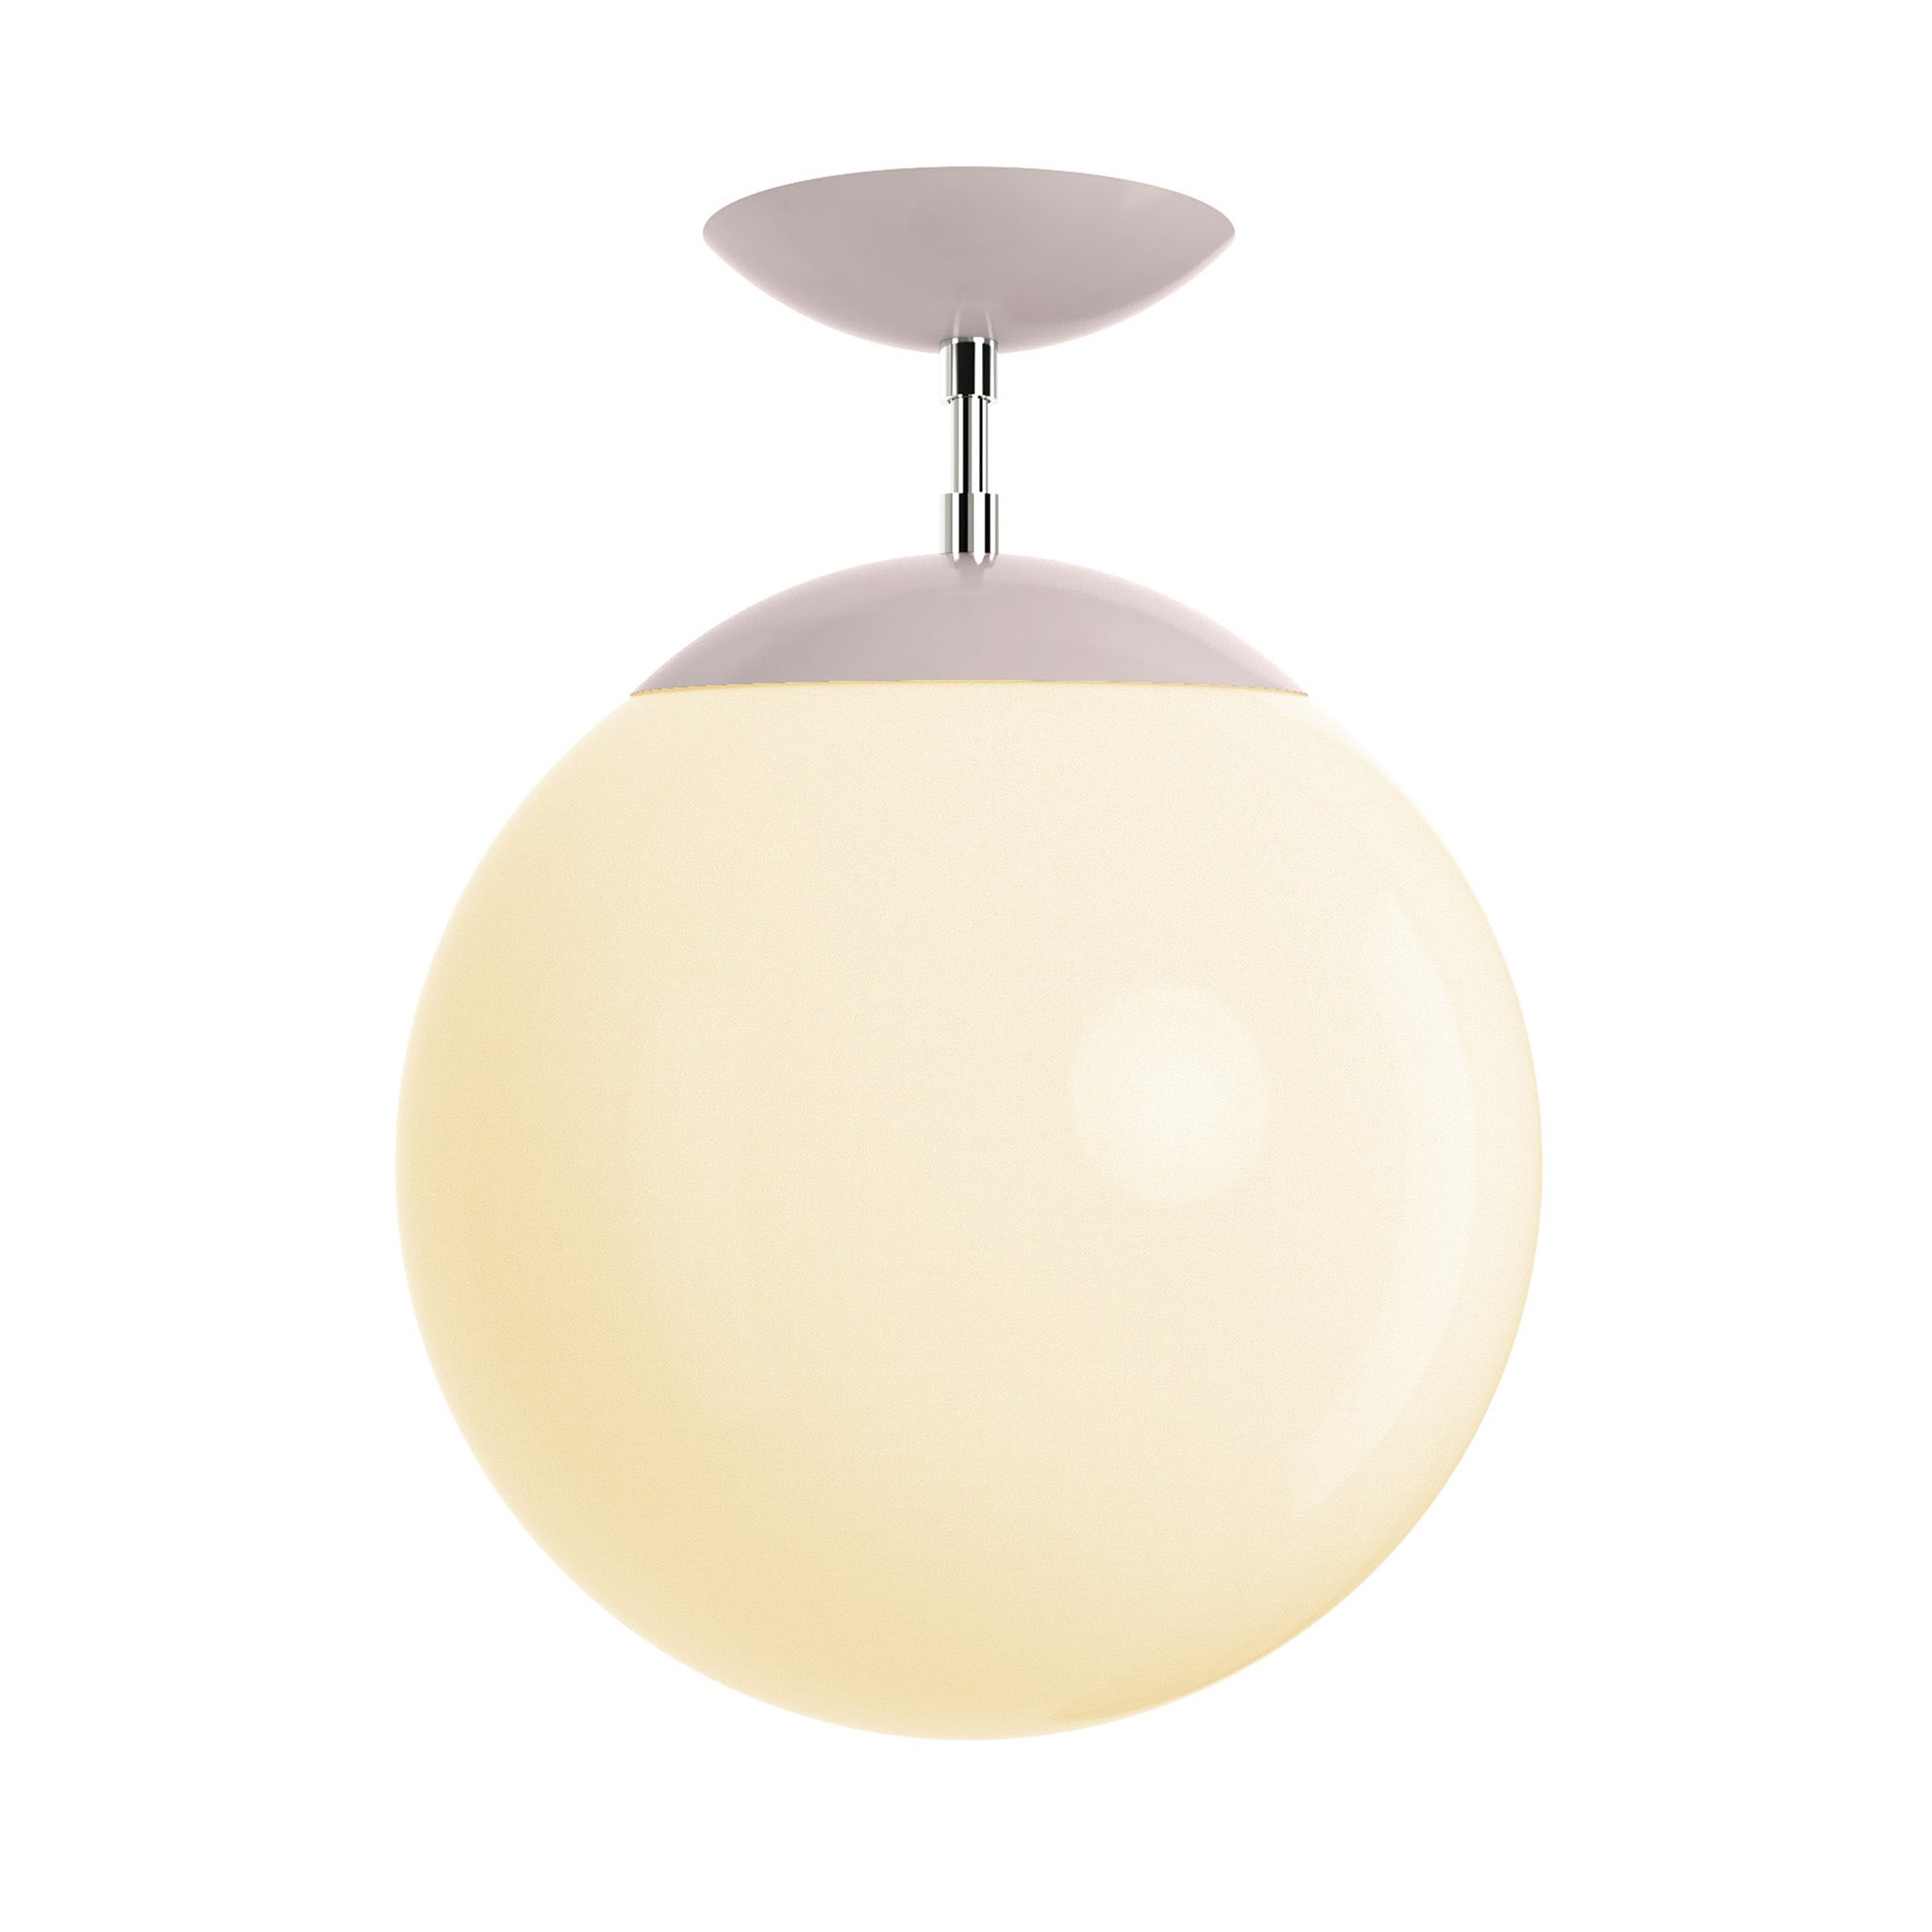 Polished nickel and barely cap white globe flush mount 12" dutton brown lighting